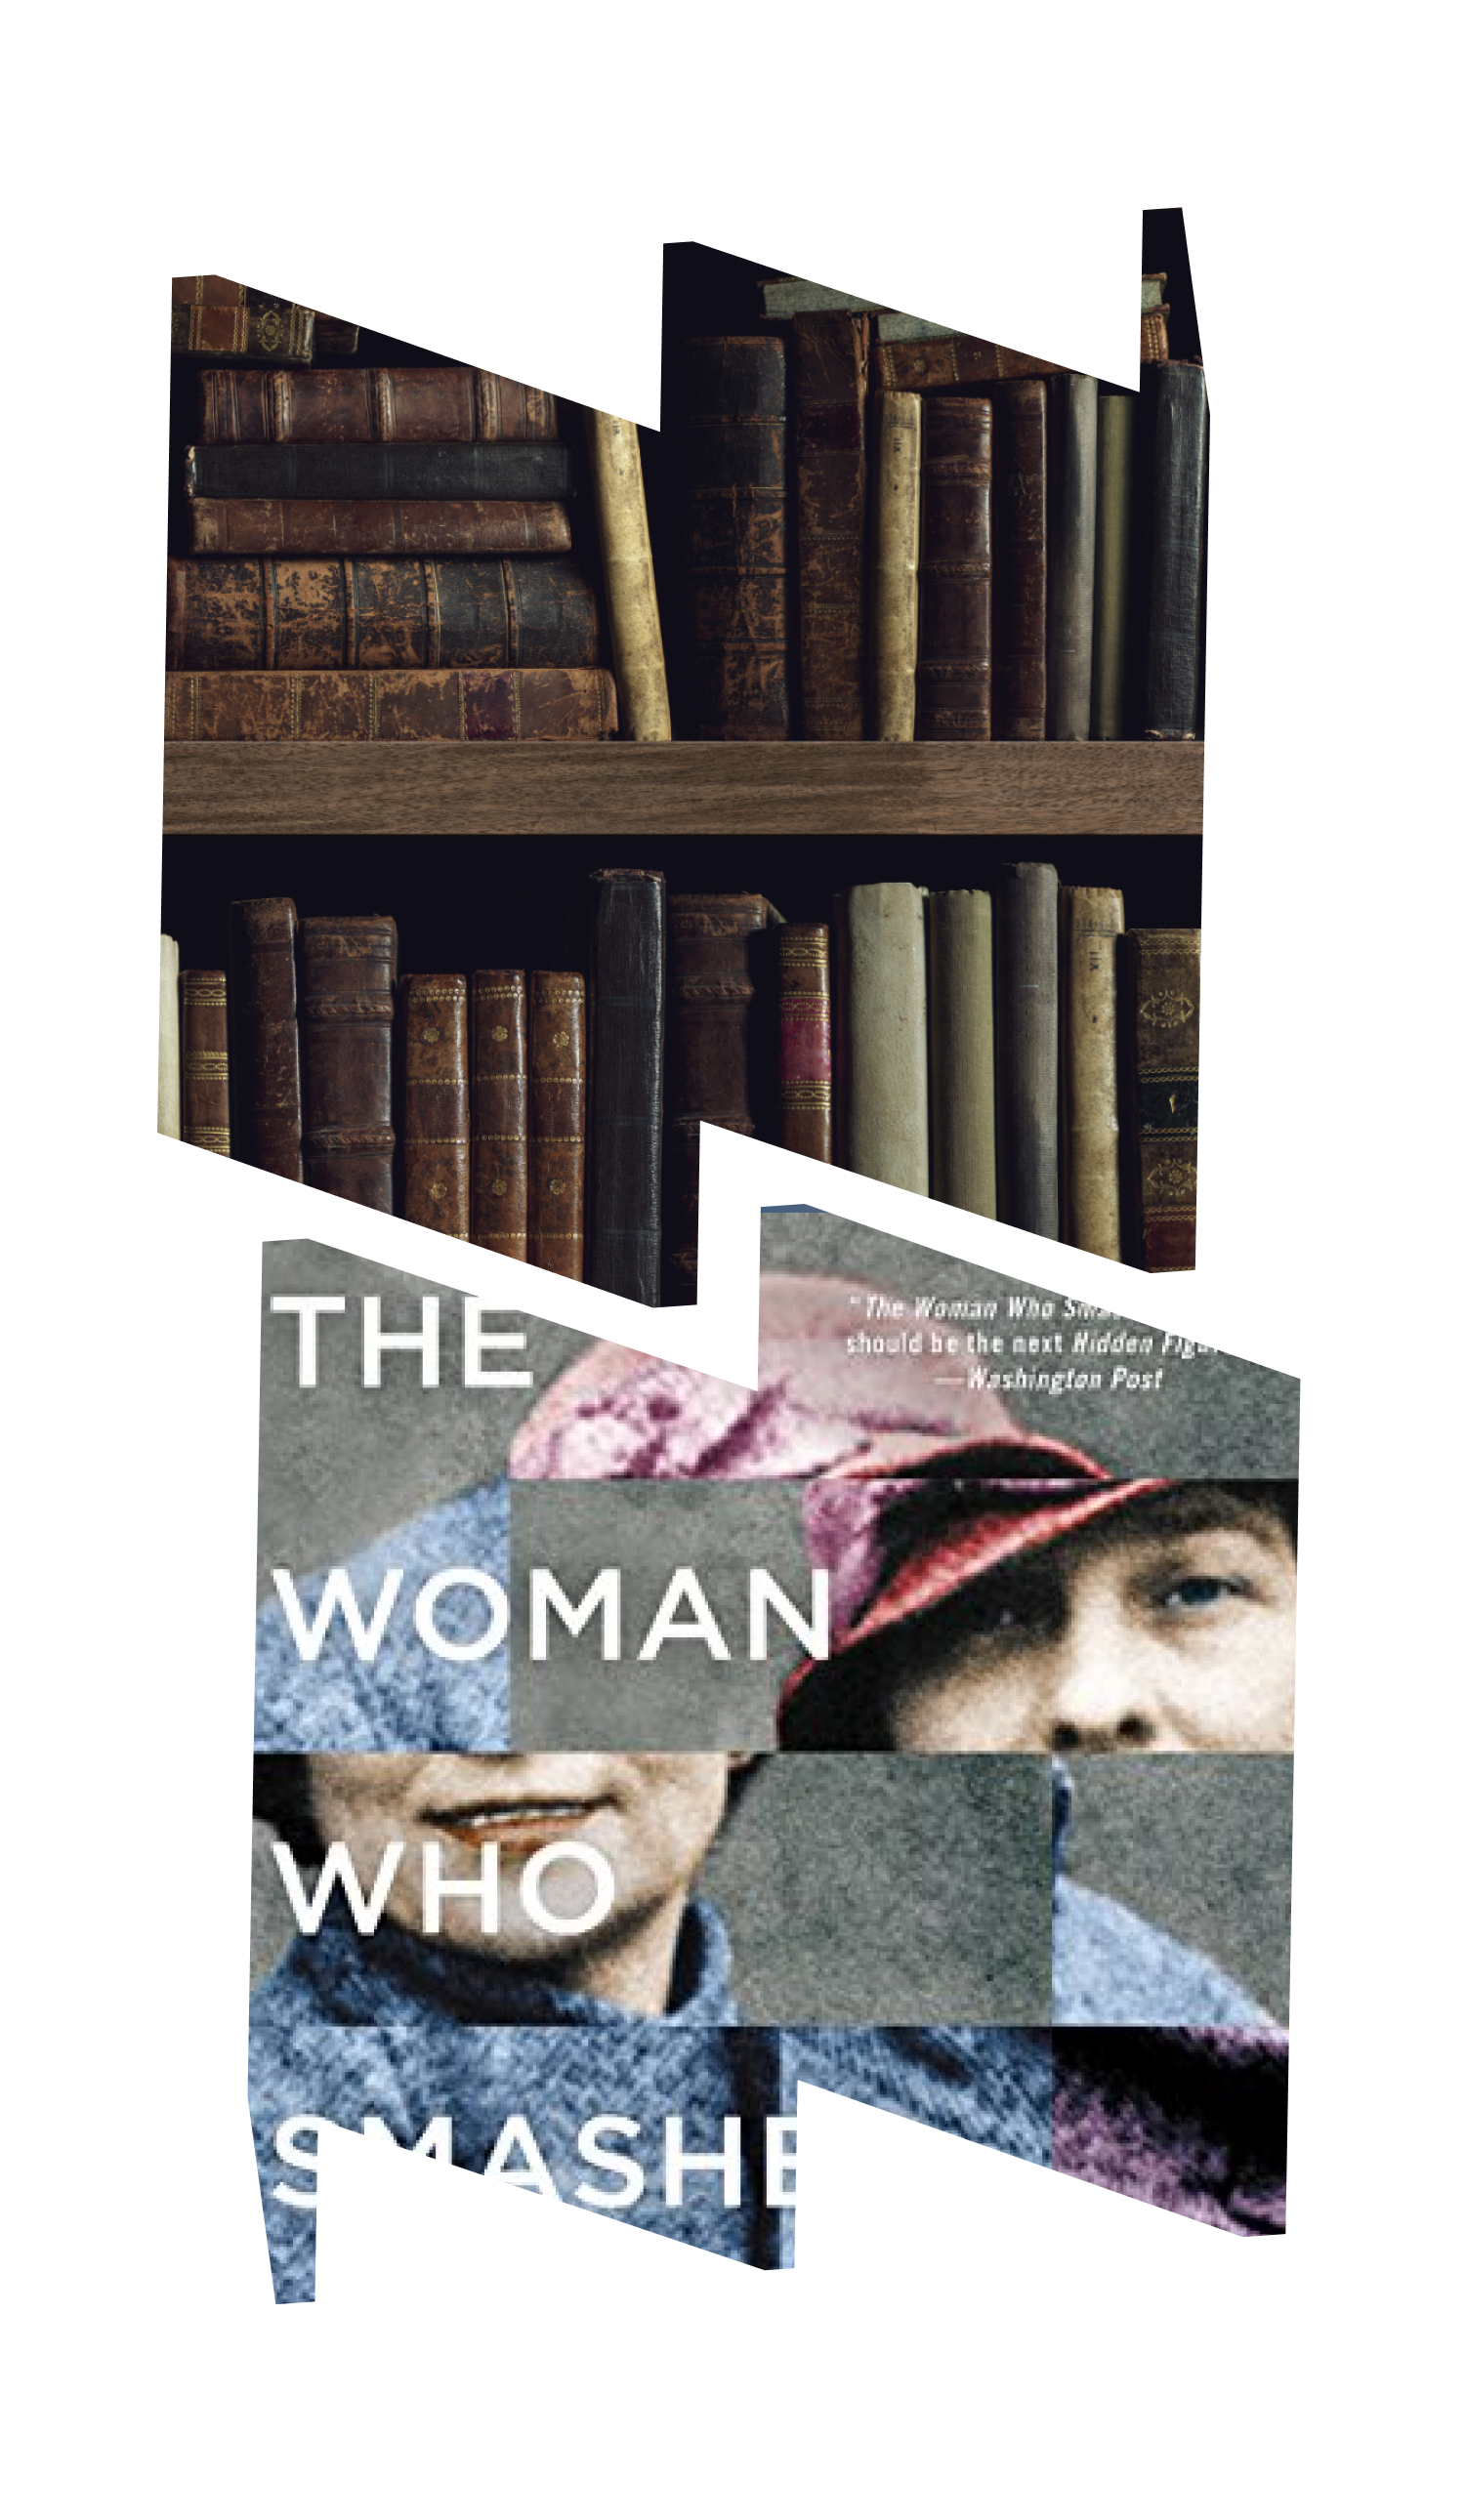 Photo of books on shelf and photo of cover of The Woman Who Smashed Codes.